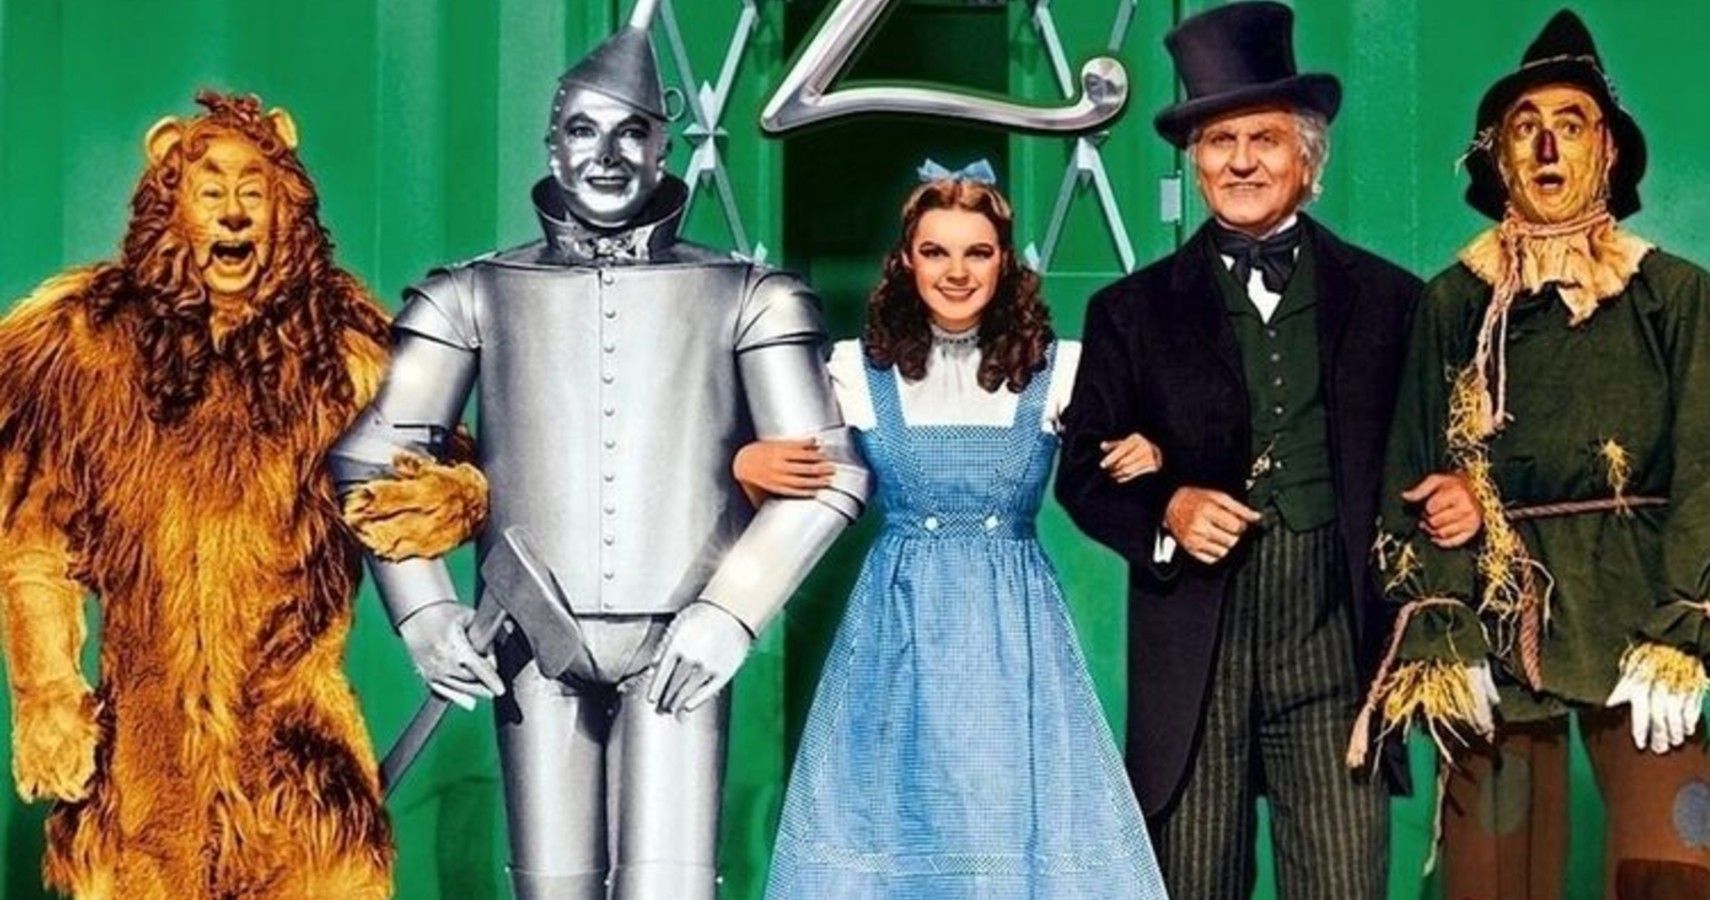 The Wizard Of Oz 10 Things Fans Didnt Know About Movie.